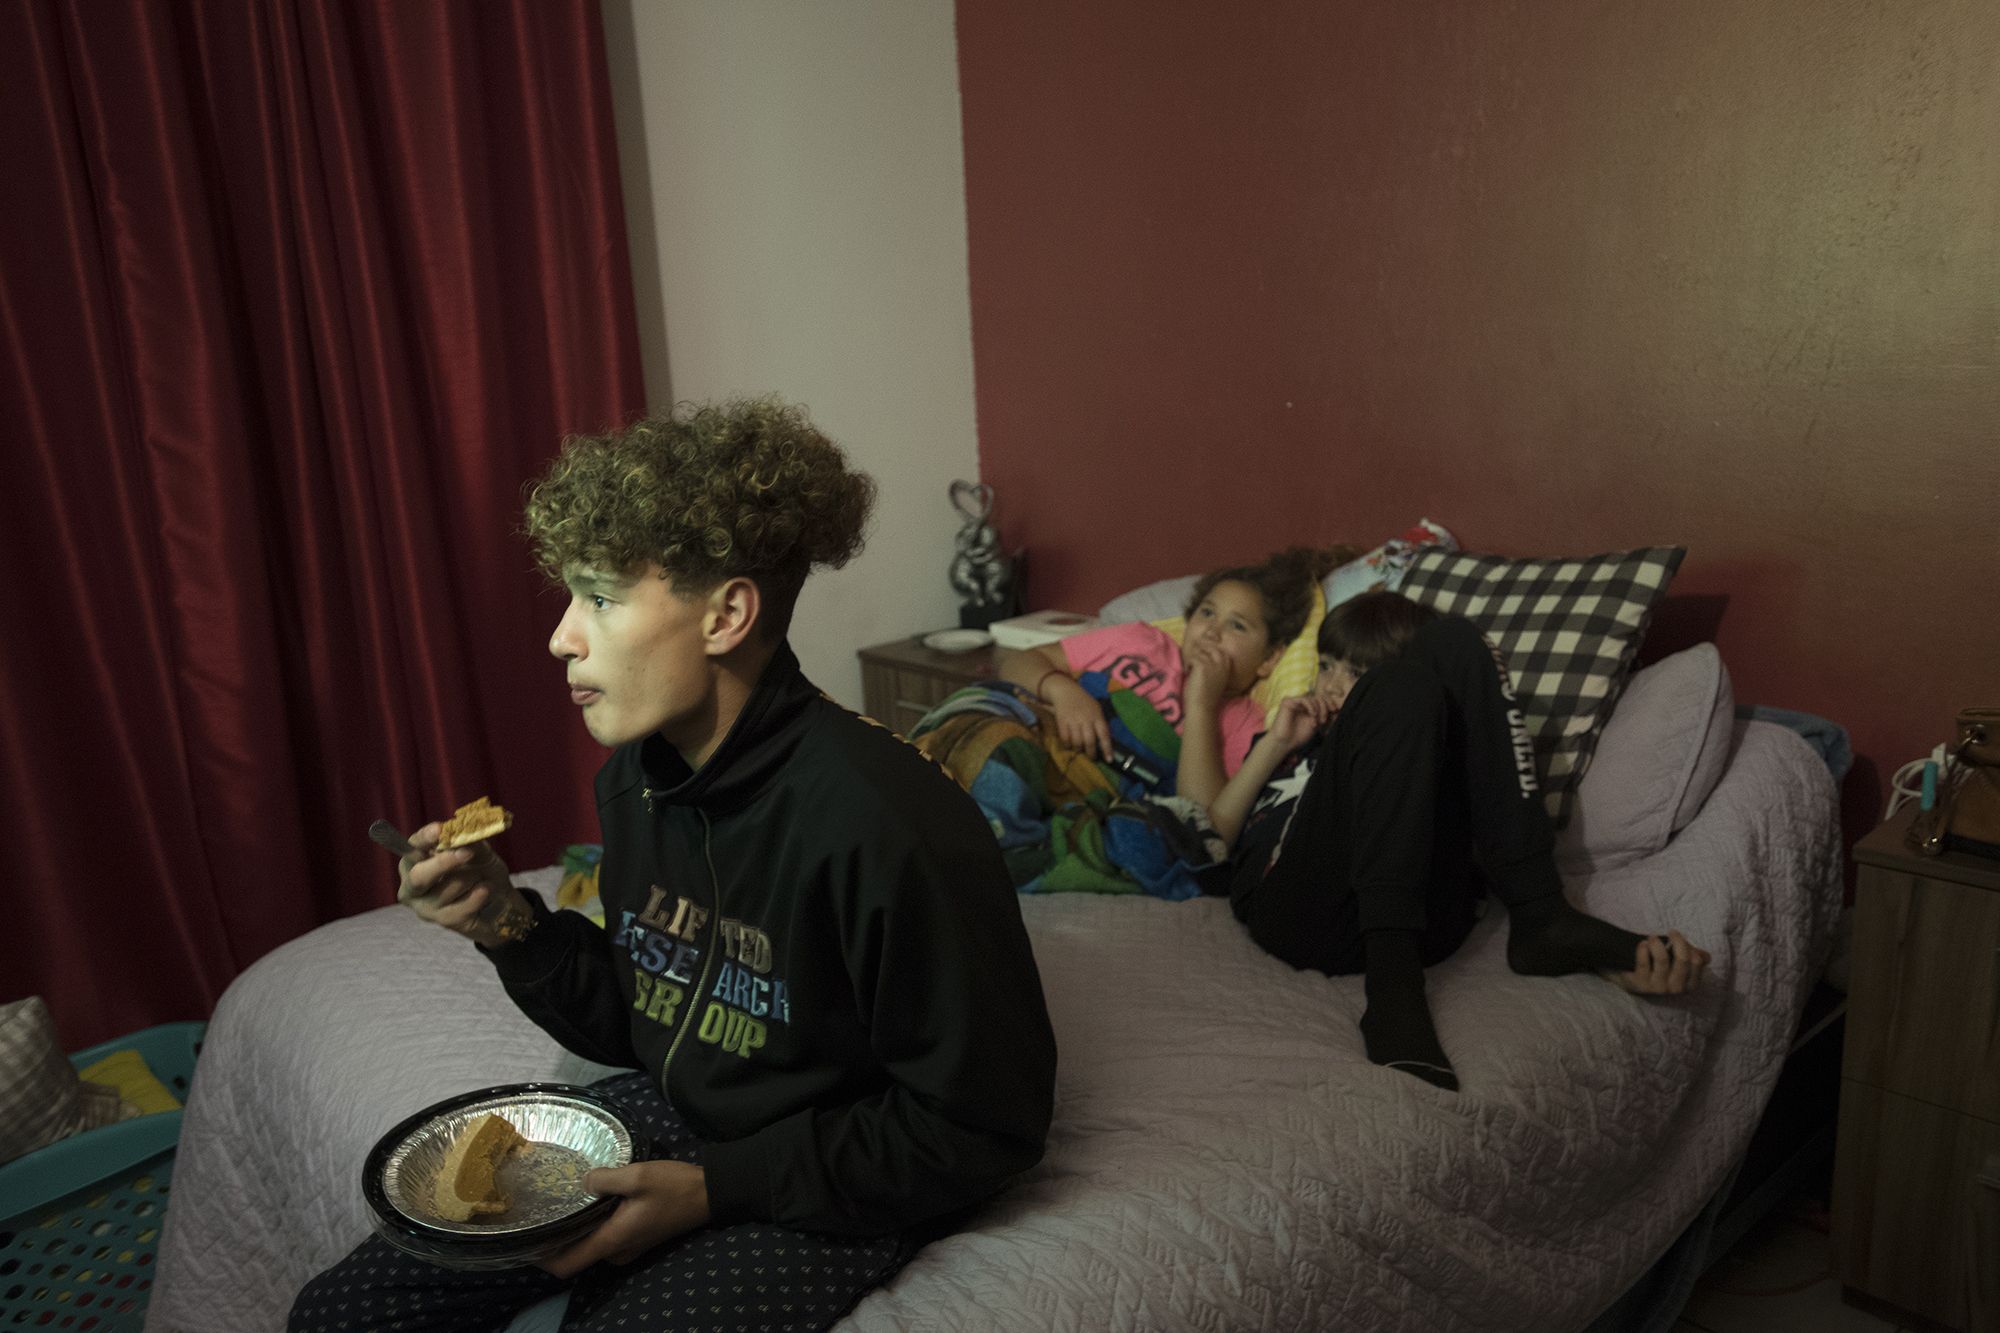 Raymond Flores polishes off the remainder of the pumpkin pie while watching Netflix before Thanksgiving dinner with his sister, Rayma, and brother, Edward. Image by Amanda Cowan. Mexico, 2019.